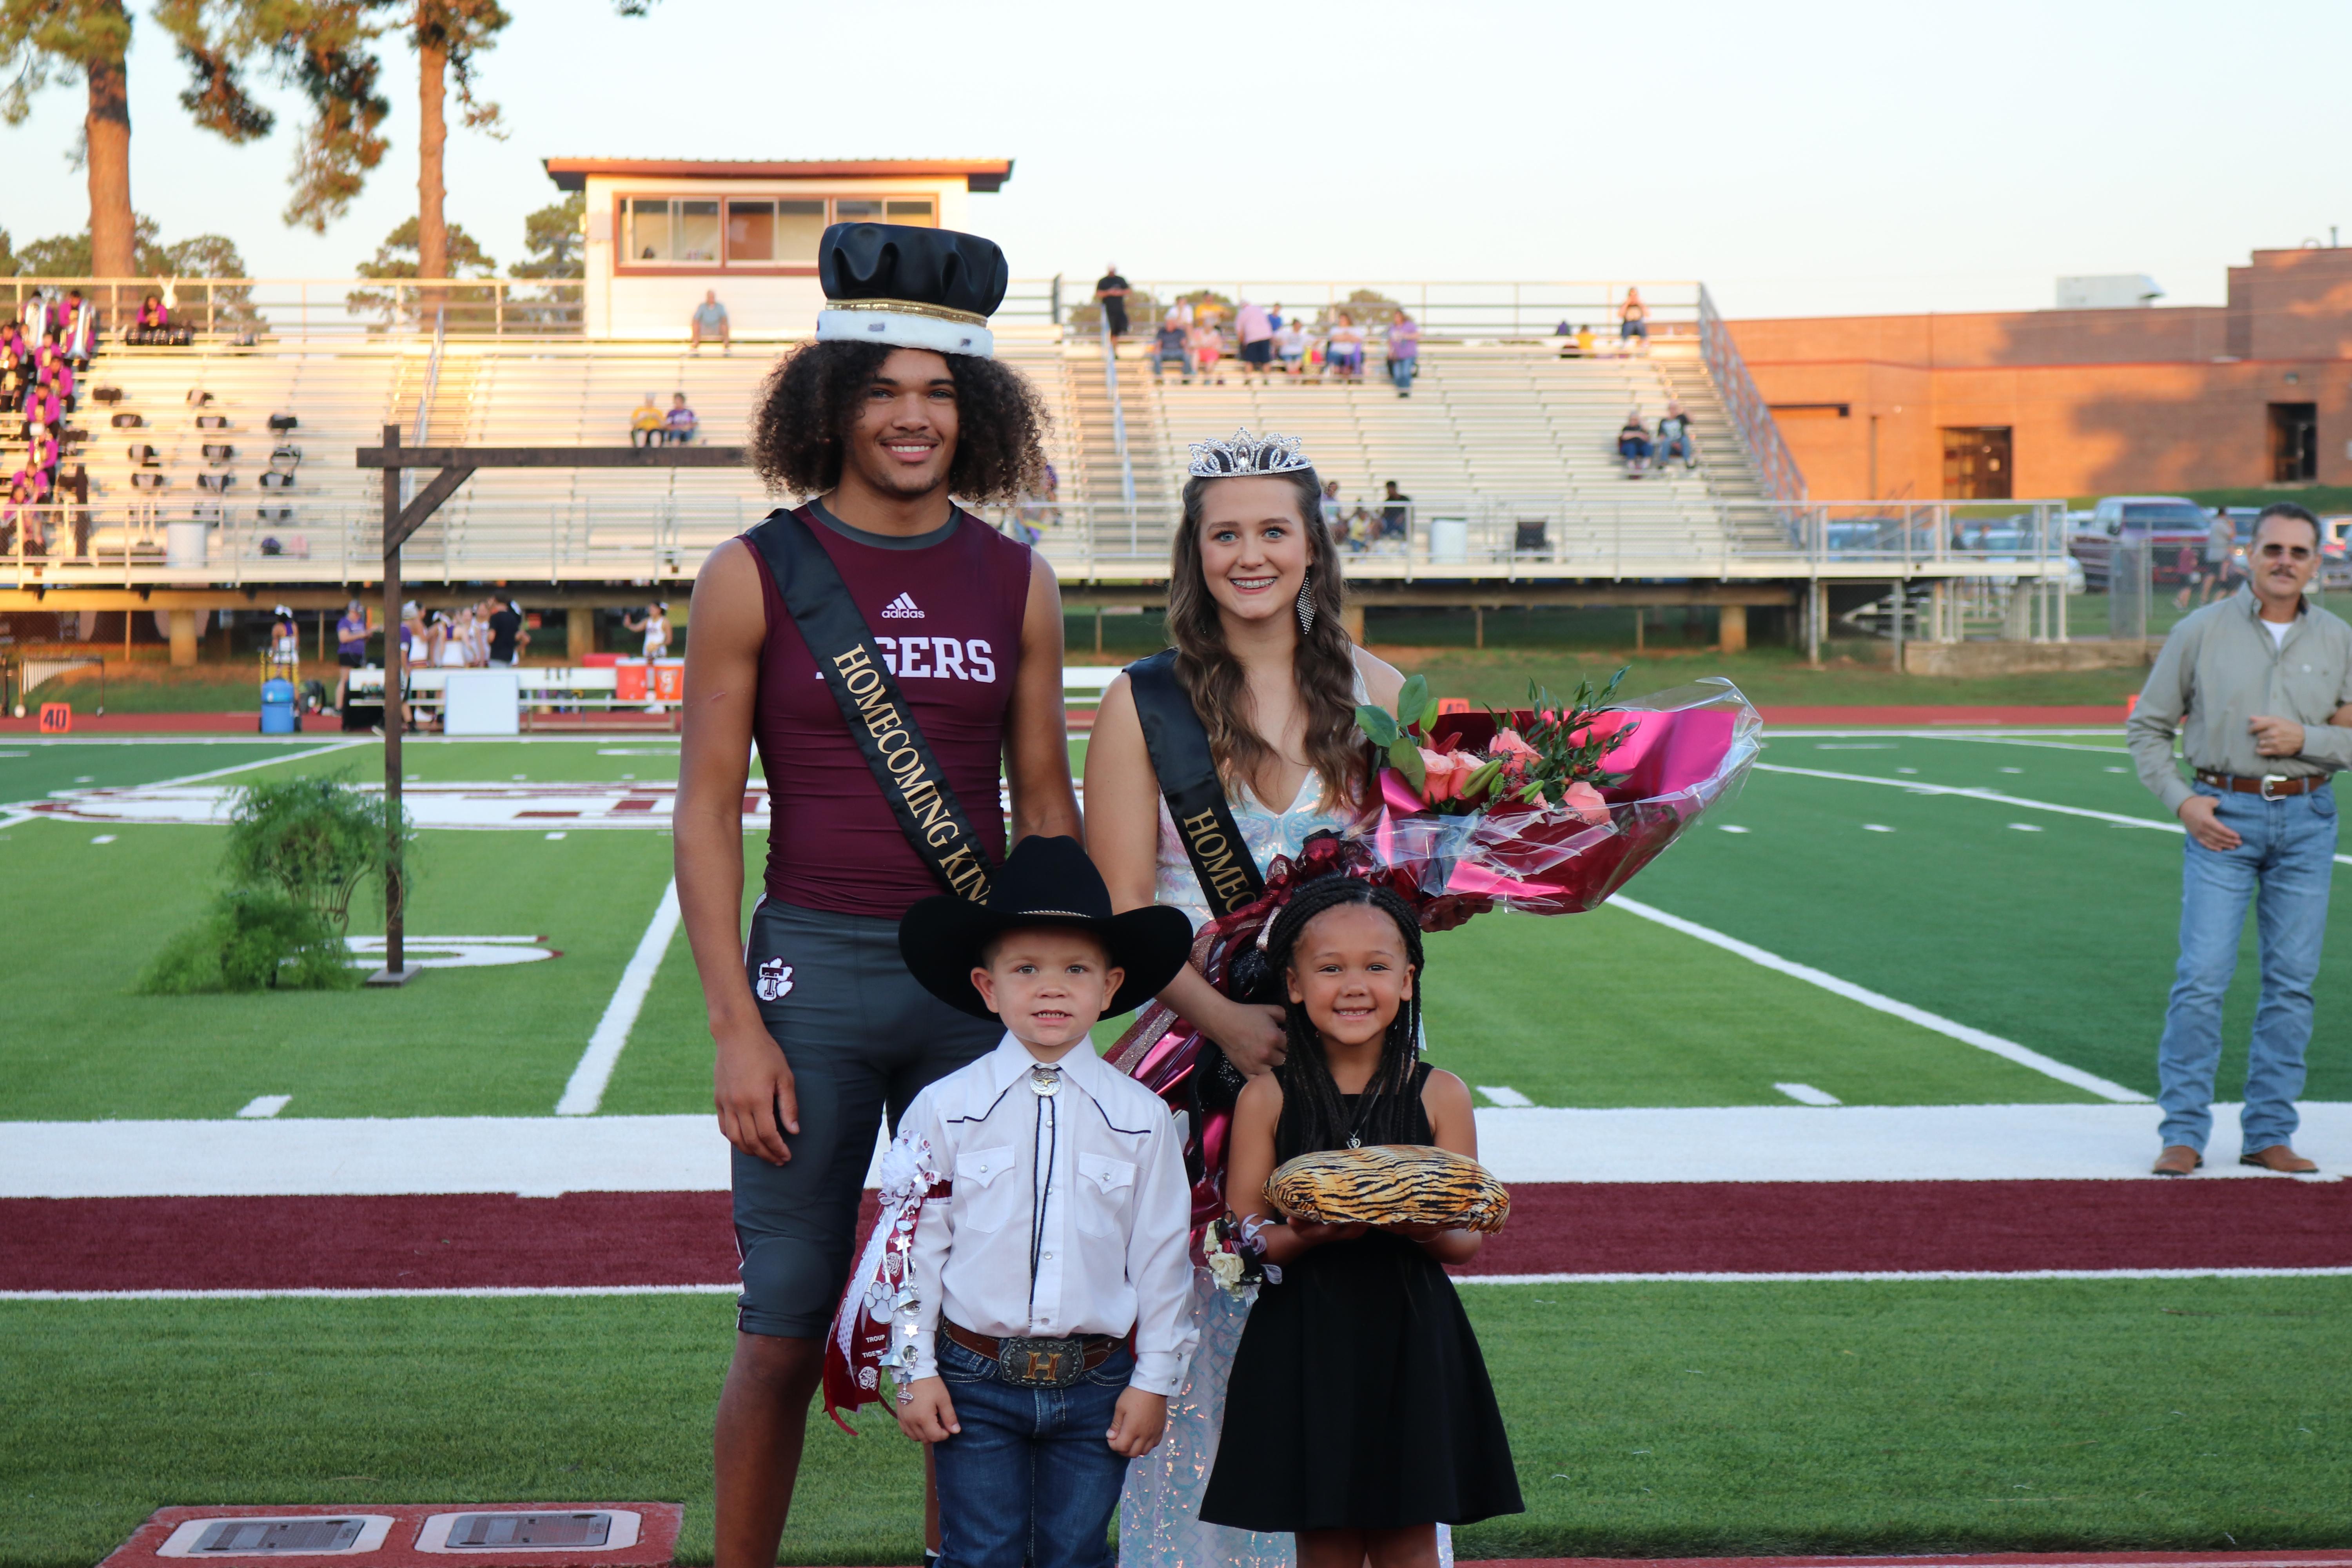 homecoming queen & king